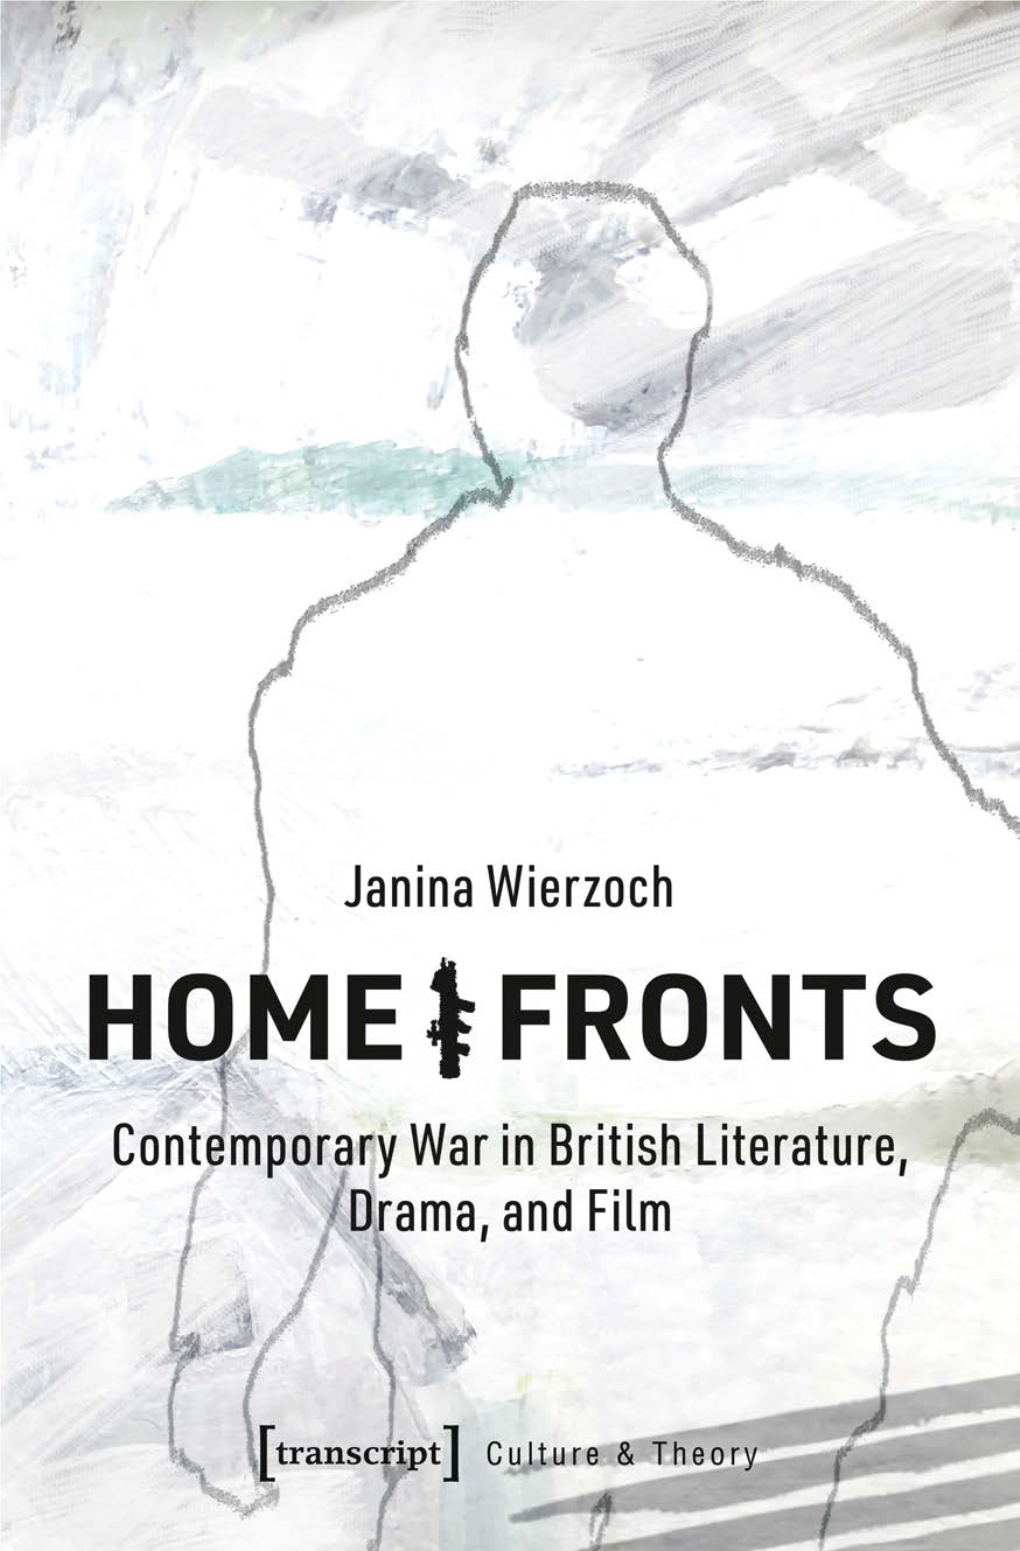 Home/Fronts Contemporary War in British Literature, Drama, and Film